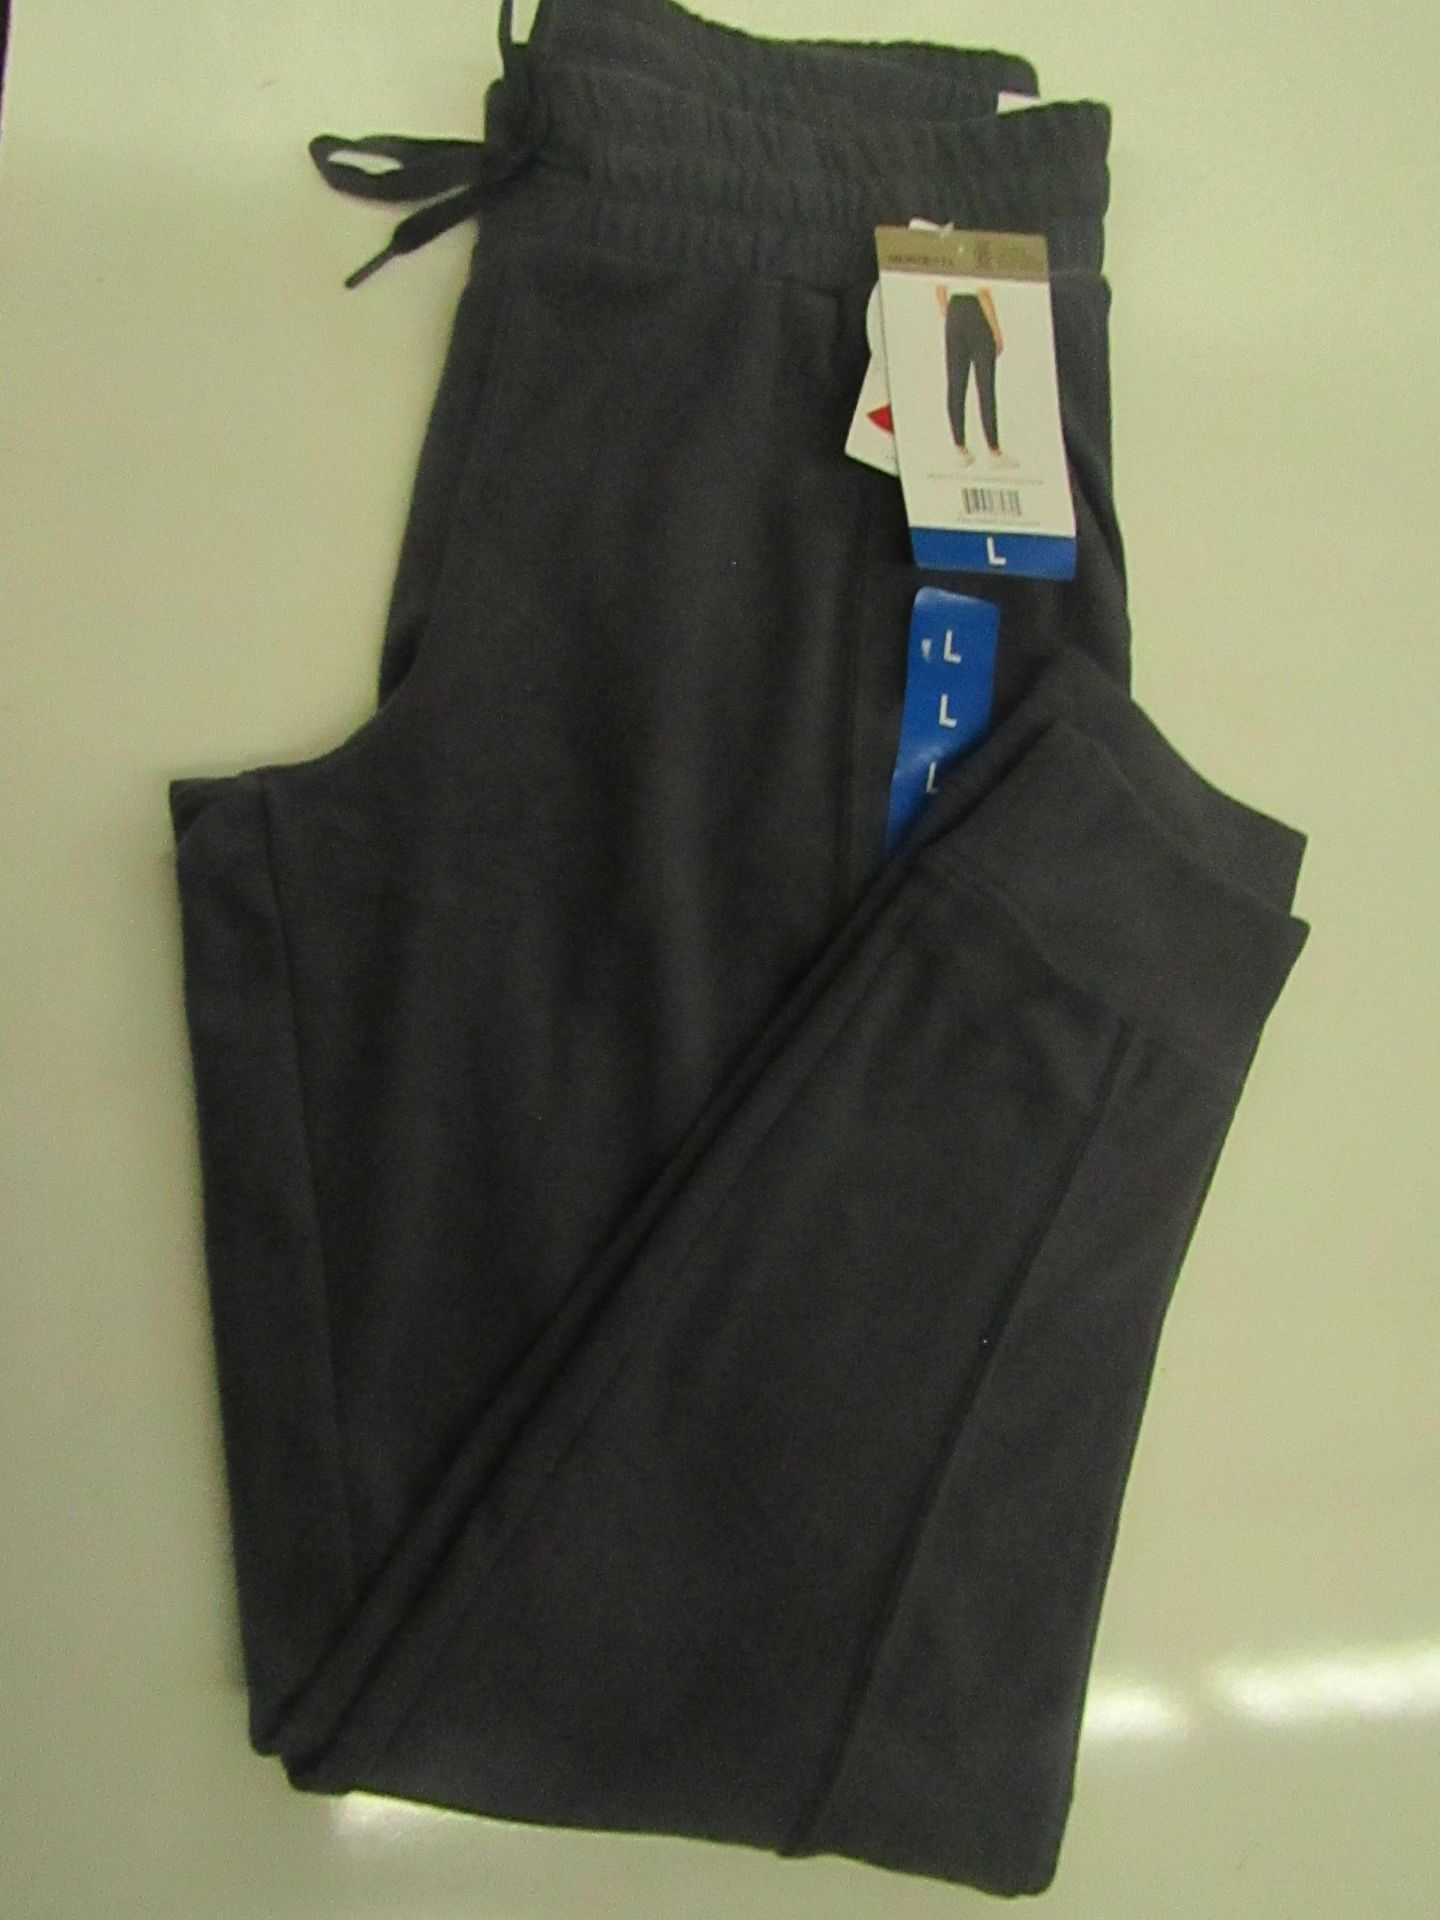 Mondetta - Ladies Cozy Joggers - India Ink Size Large - New With Tags.